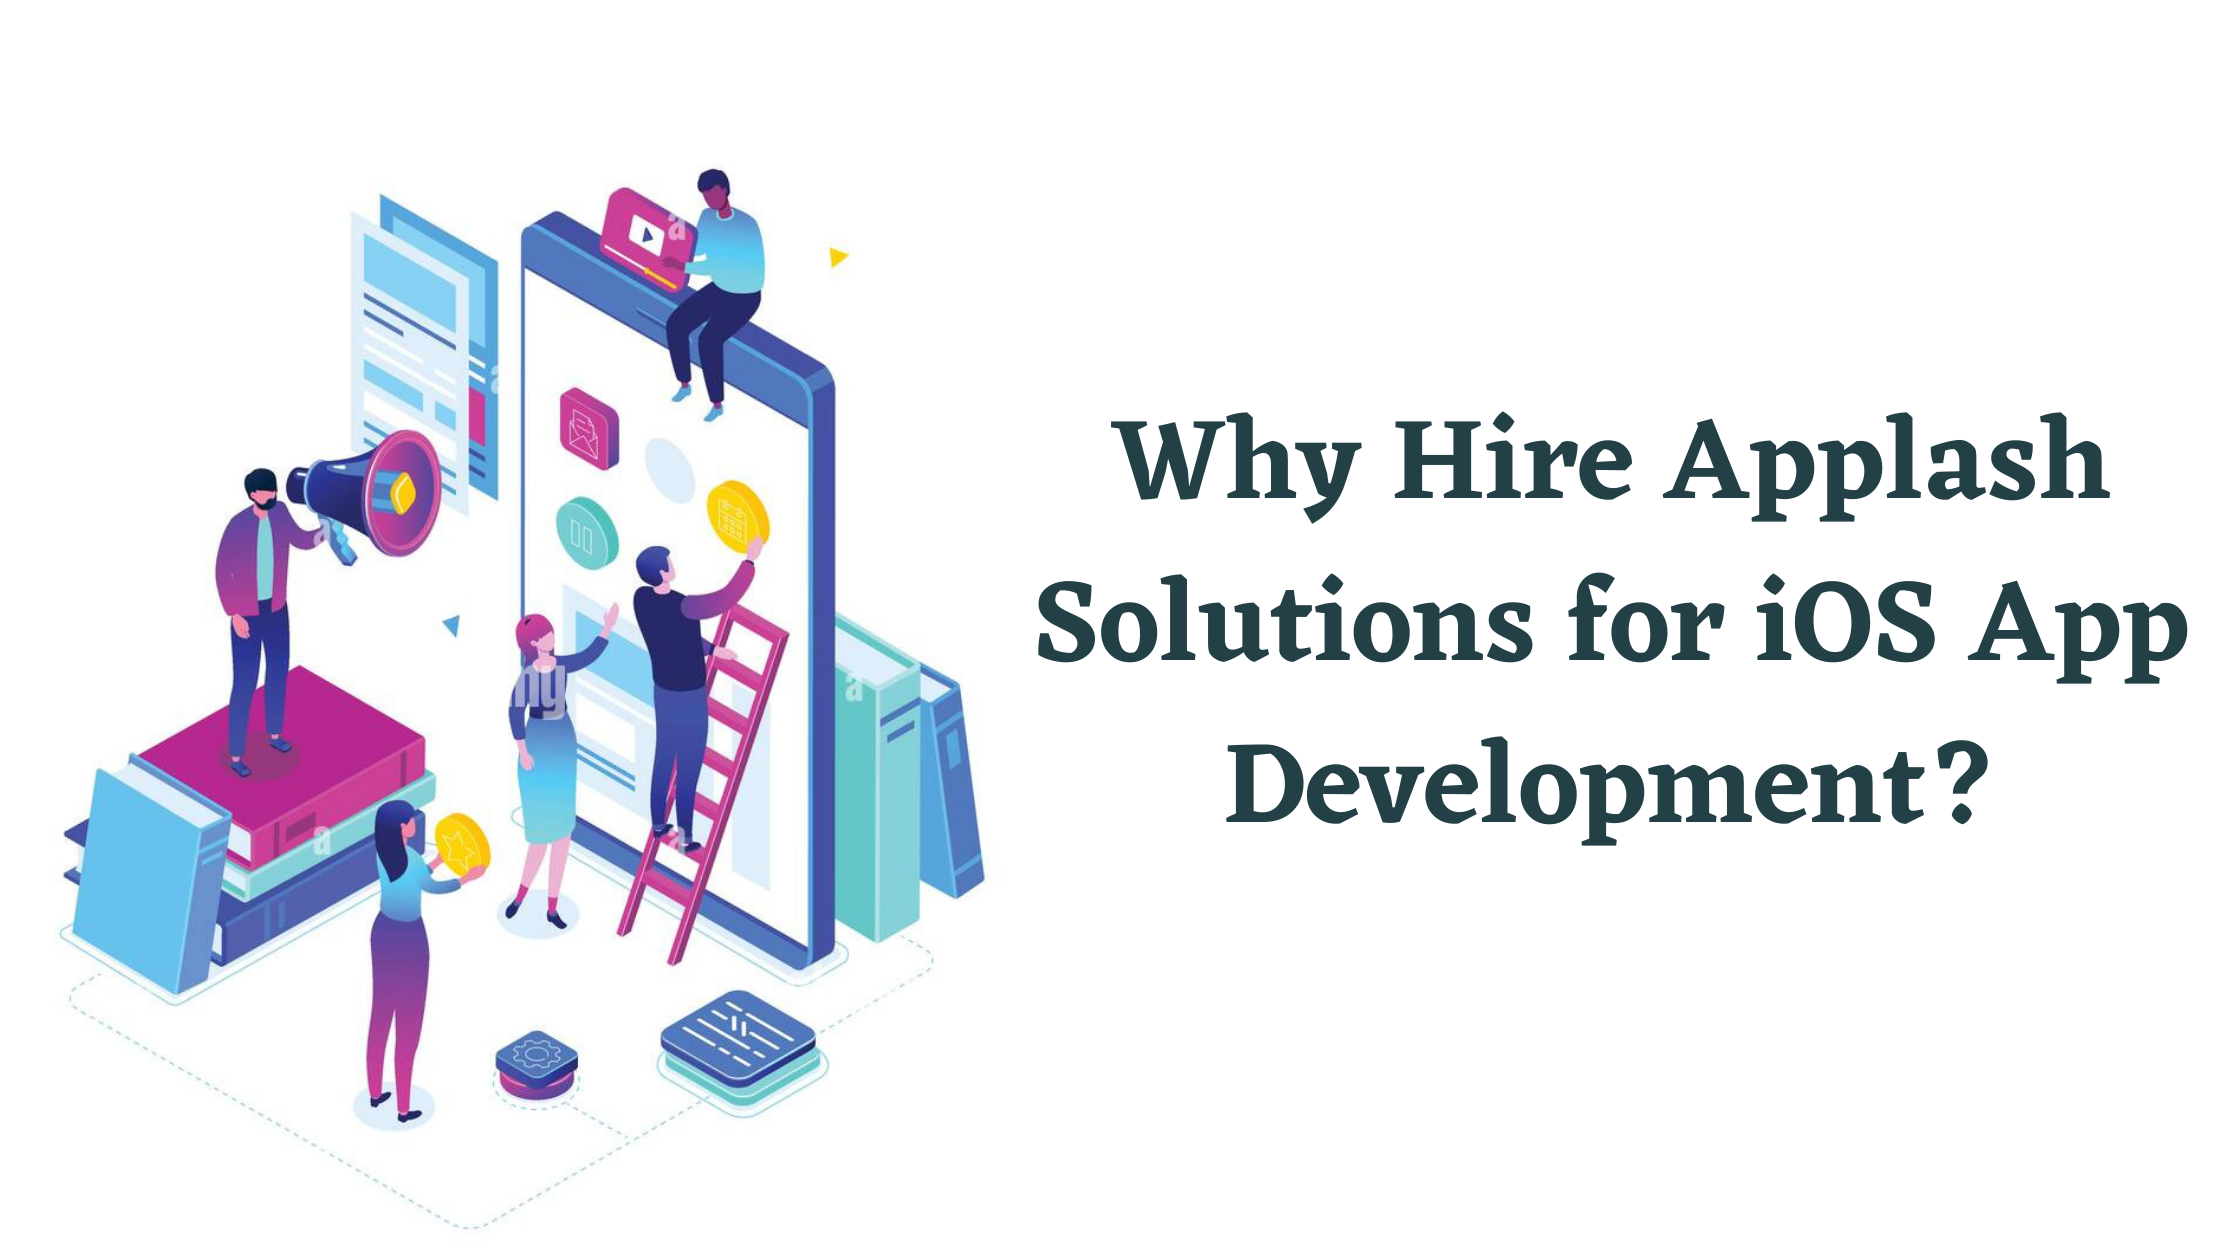 Why Hire Applash Solutions for iOS App Development?